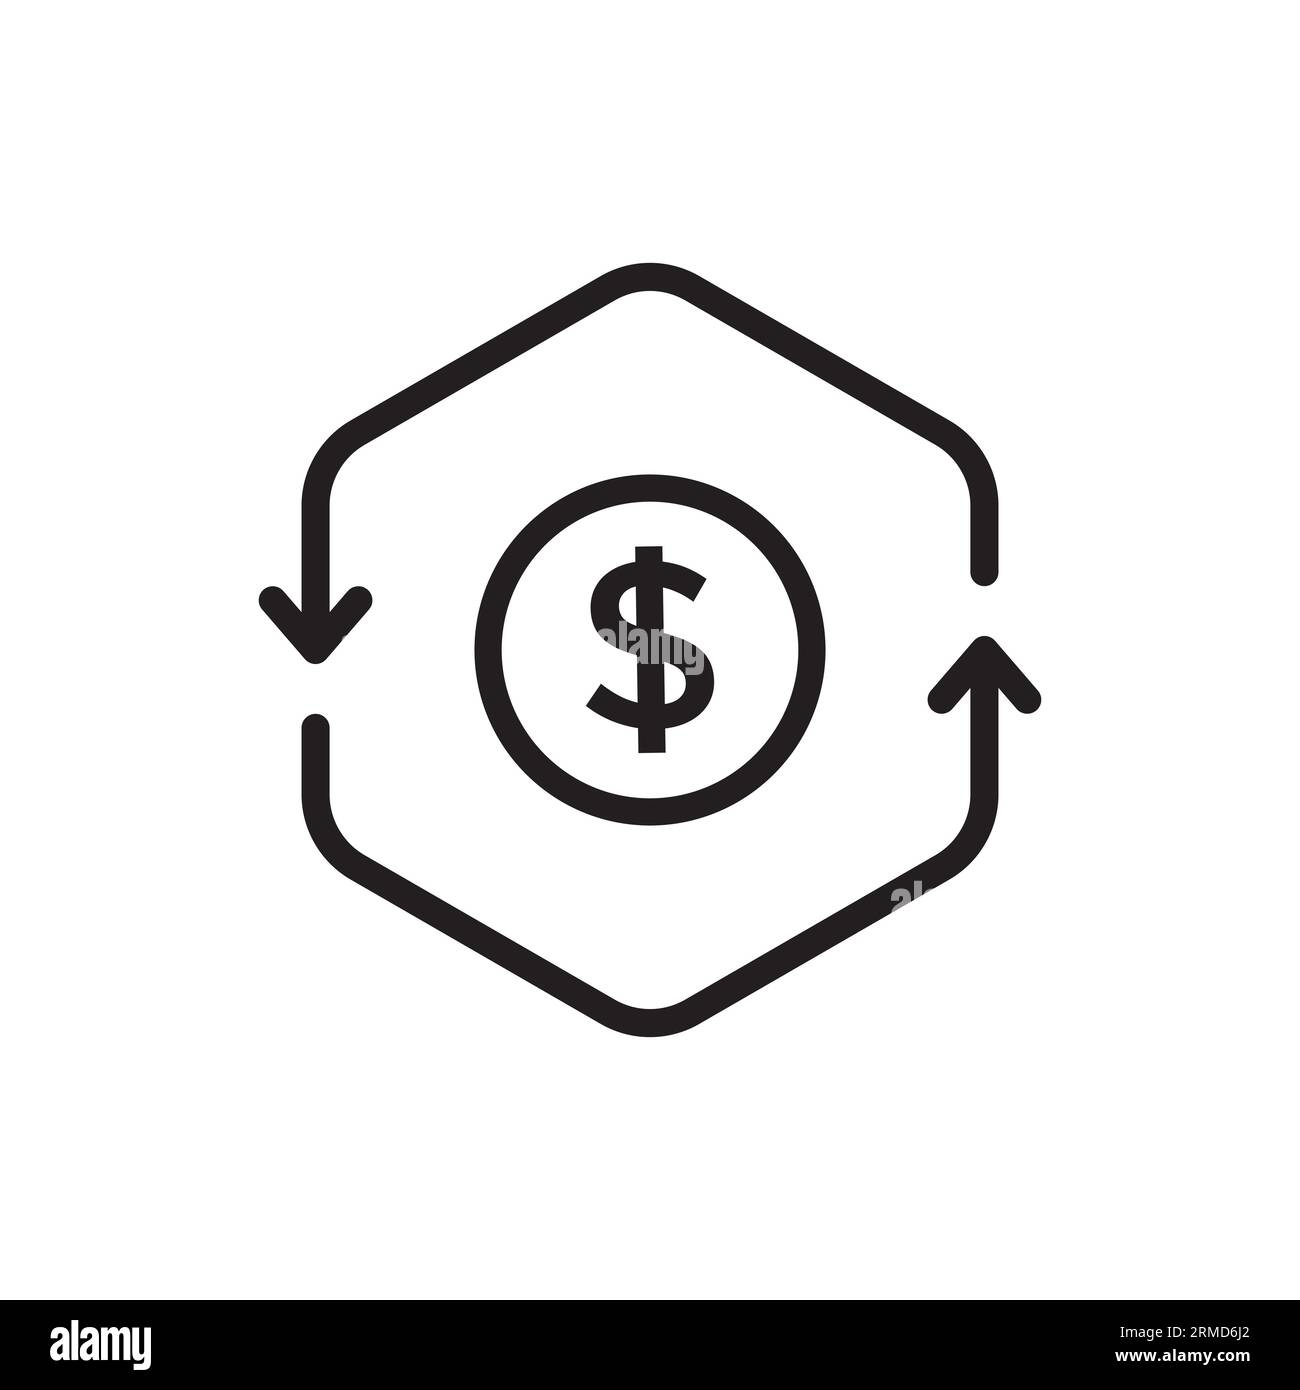 thin line cash flow or transaction icon. flat stroke trend modern lineart cashflow logotype graphic art design isolated on white background. concept o Stock Vector